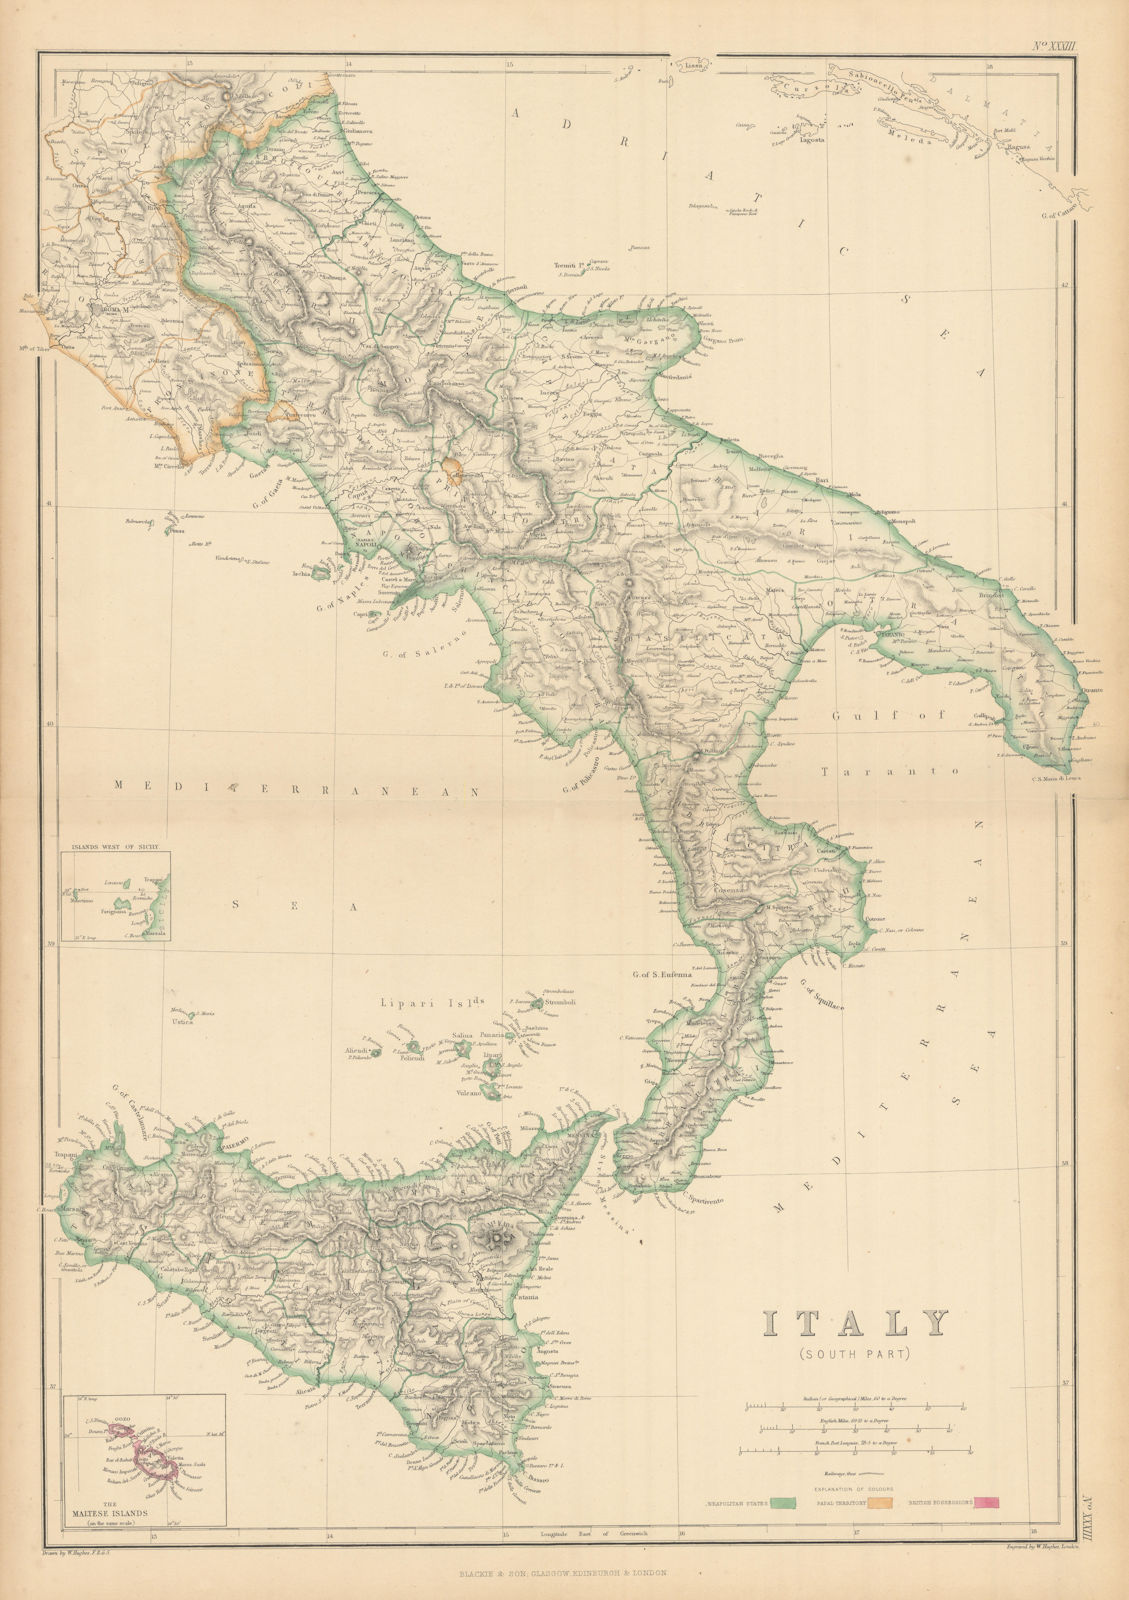 Associate Product Southern Italy. Naples. Kingdom of the two Sicilies. By William Hughes 1859 map